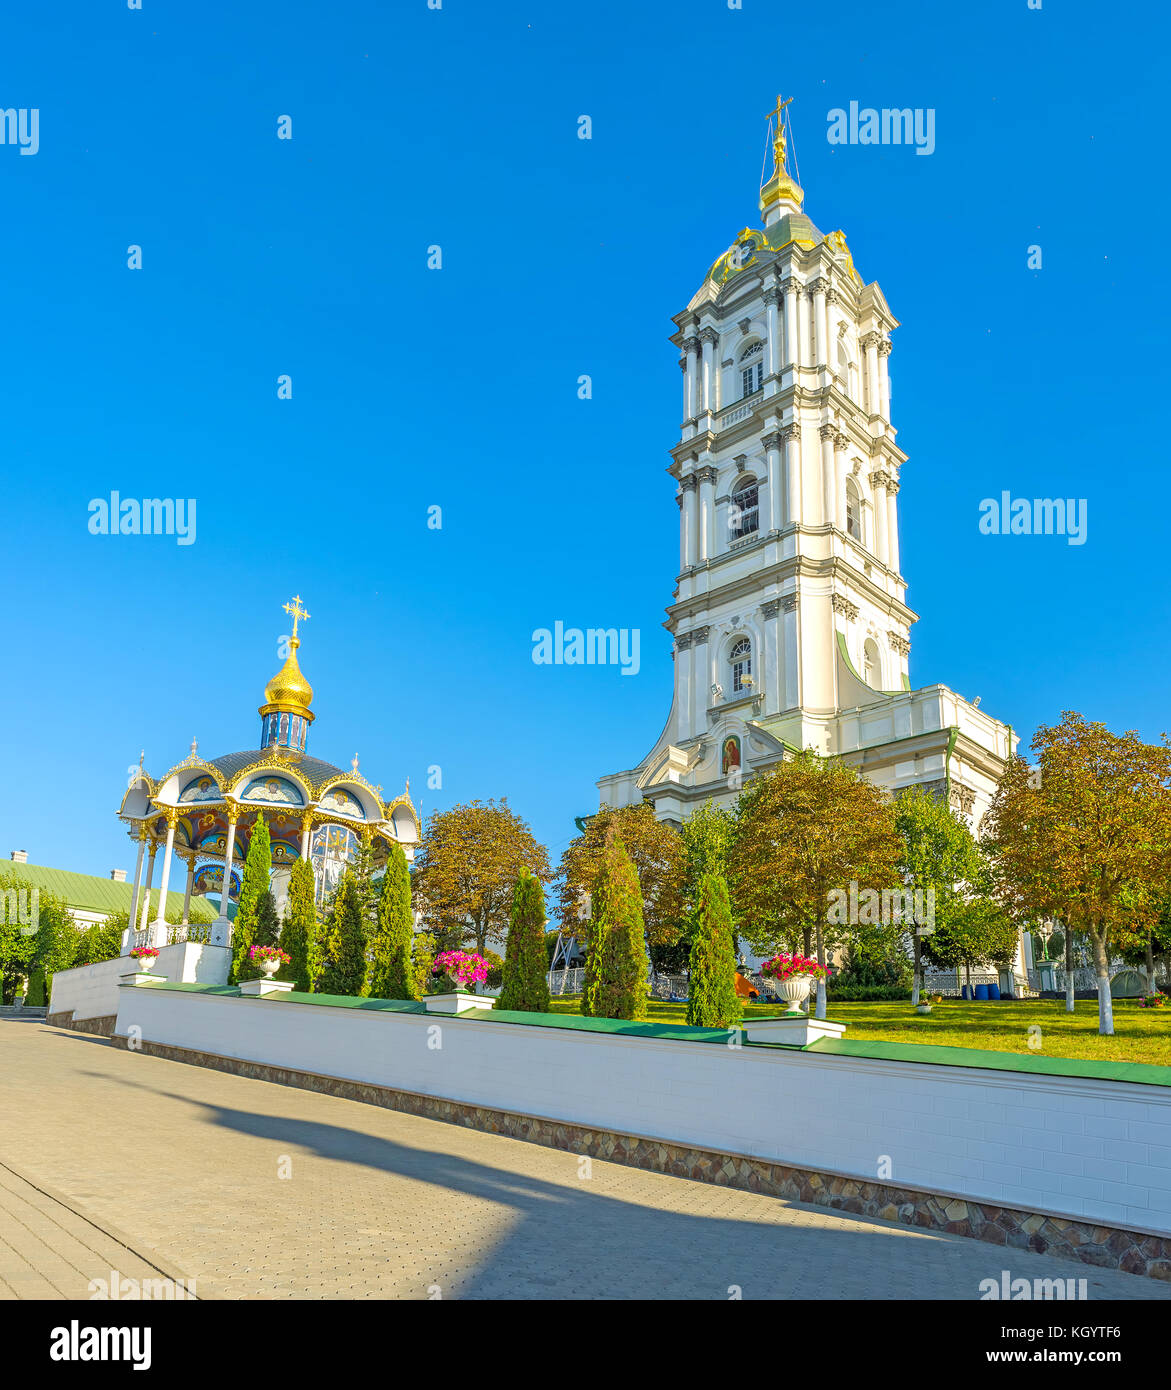 Pochaev Lavra is one of the most revered orthodox monastery complexes in Eastern Europe, its place of interest among tourists and pilgrims, Ukraine Stock Photo